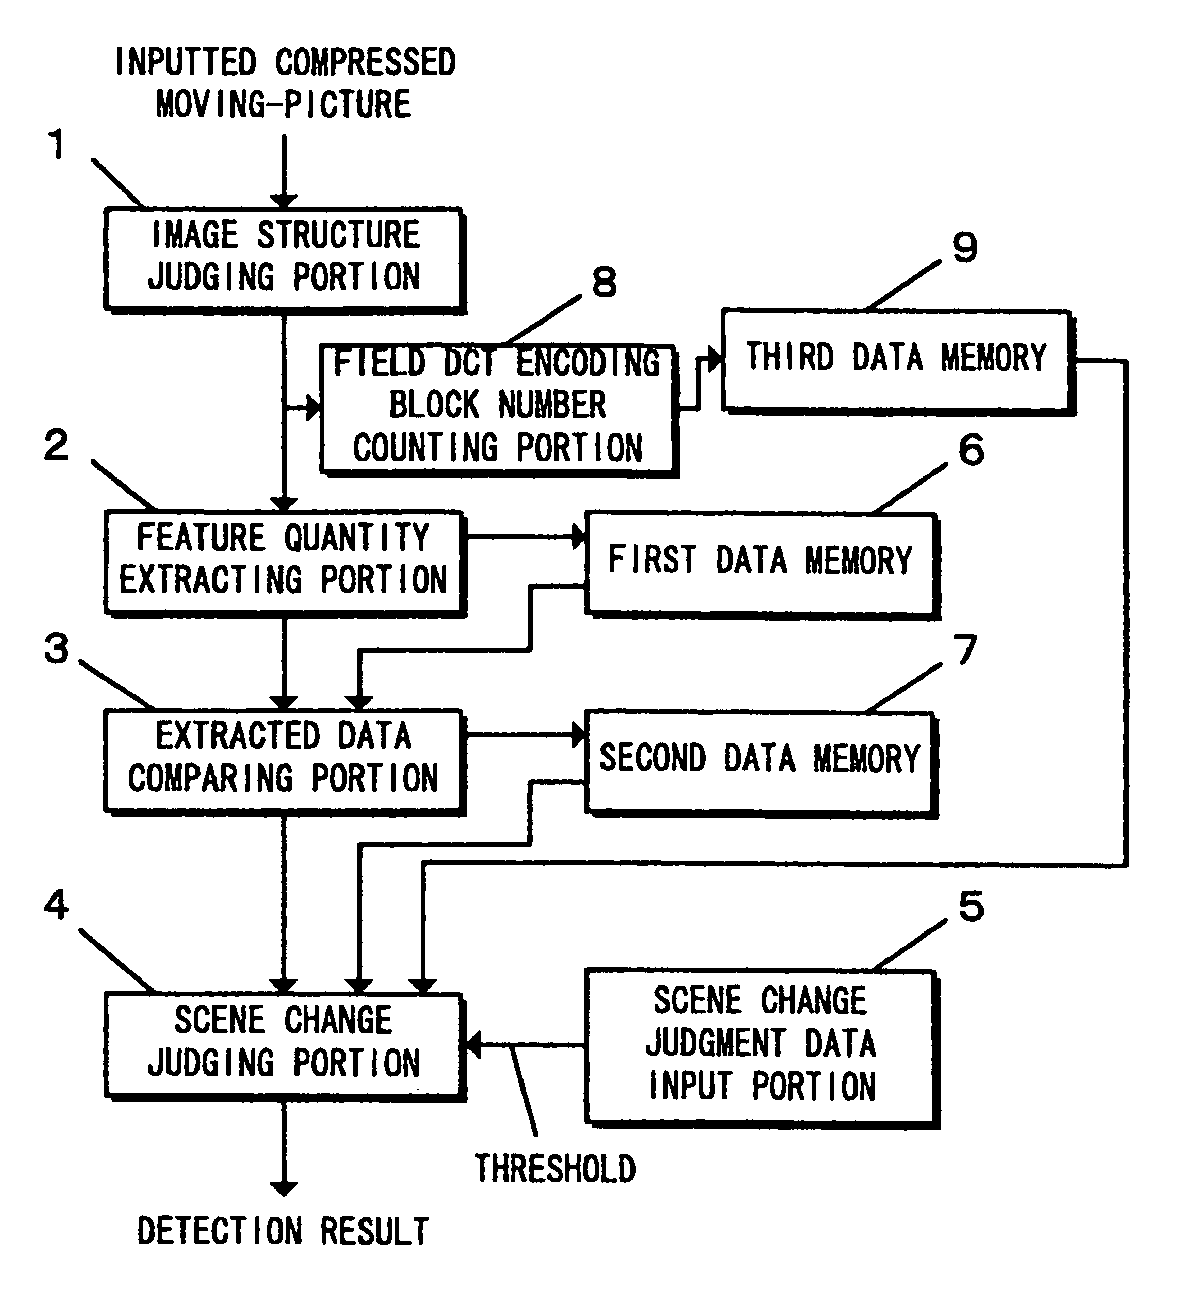 Method and apparatus for detecting scene change of a compressed moving-picture, and program recording medium therefor